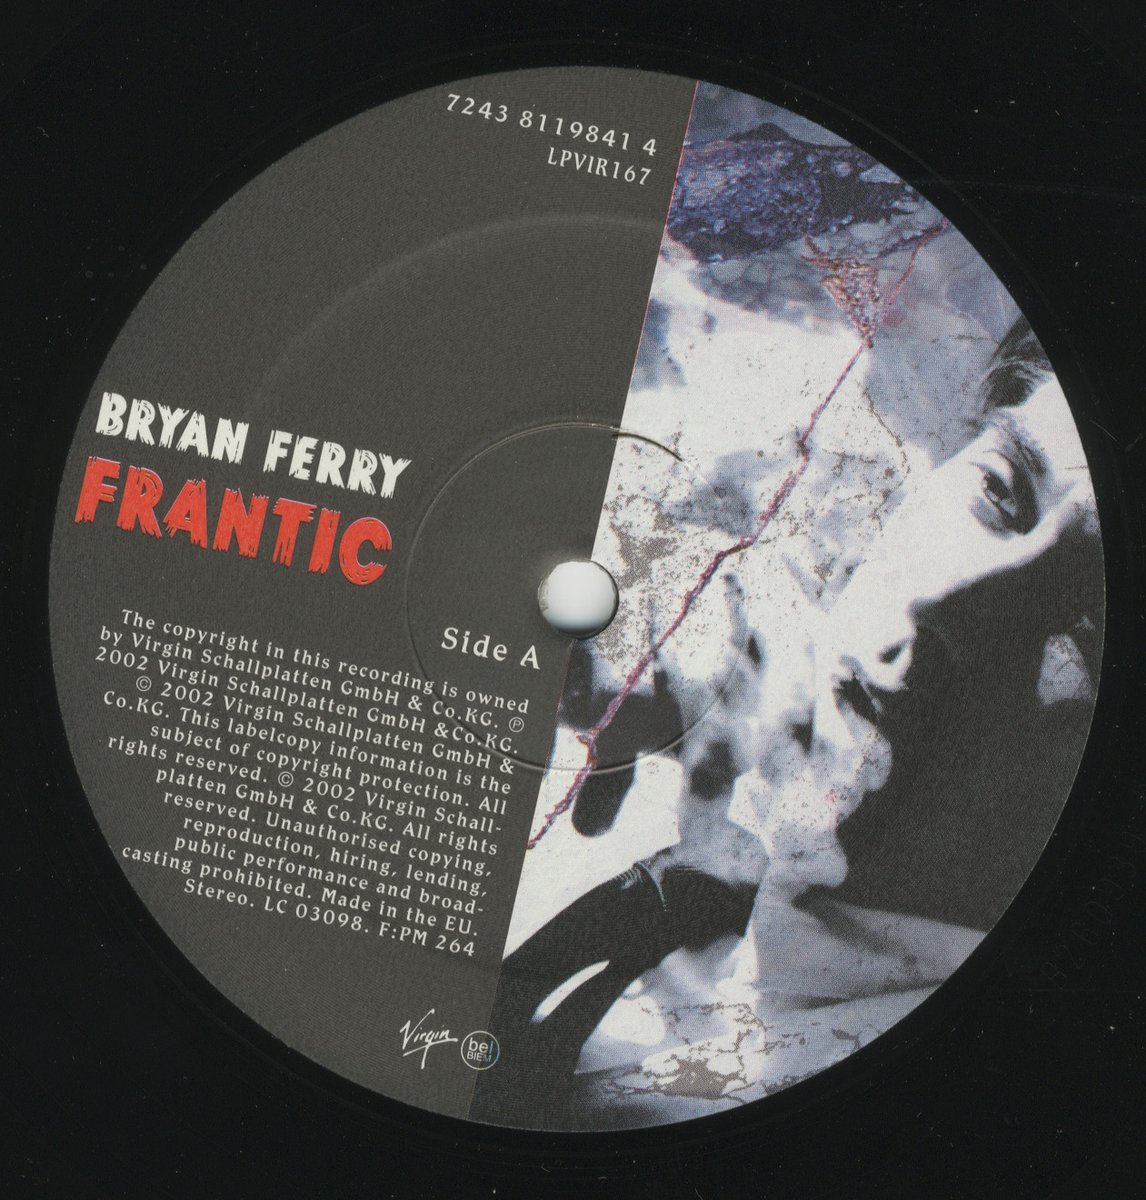 Bryan Ferry released his 11th solo album 'Frantic' on 29th April 2002.
lnk.to/bf-frantic
#bryanferry #onthisday